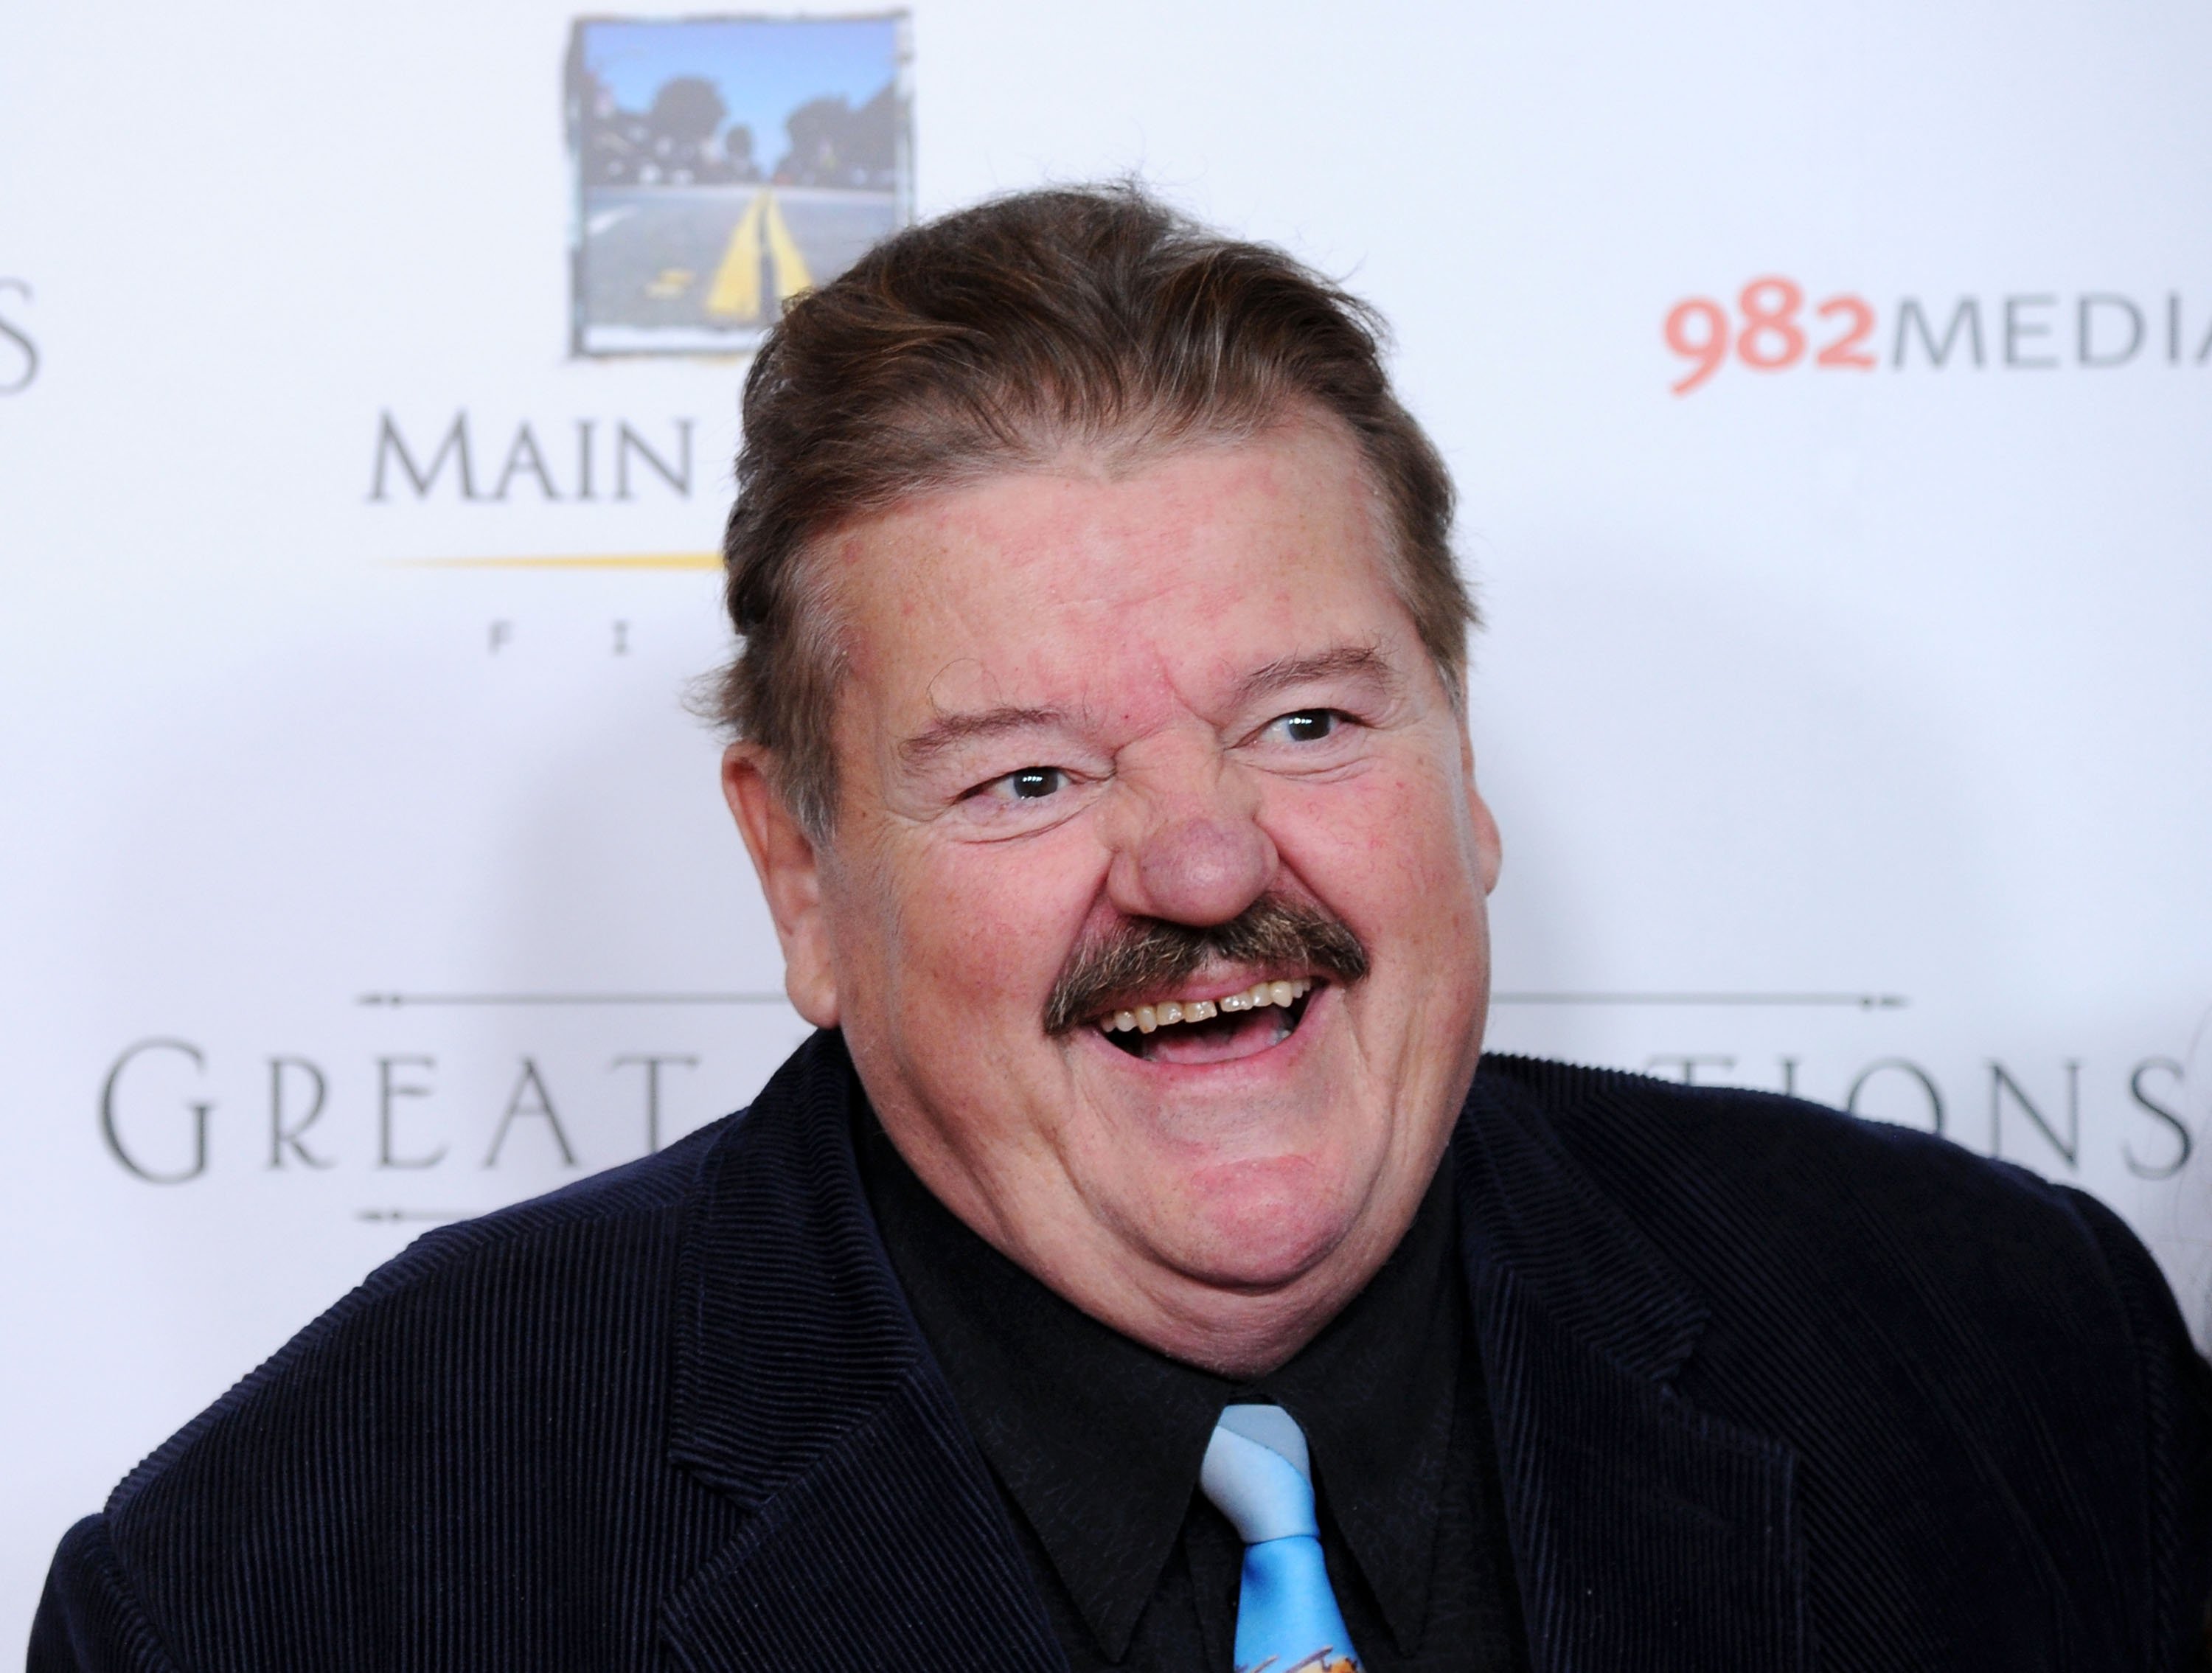 Robbie Coltrane, who starred as Hagrid in the 'Harry Potter' movies, wears a black suit over a black button-up shirt and light blue tie.